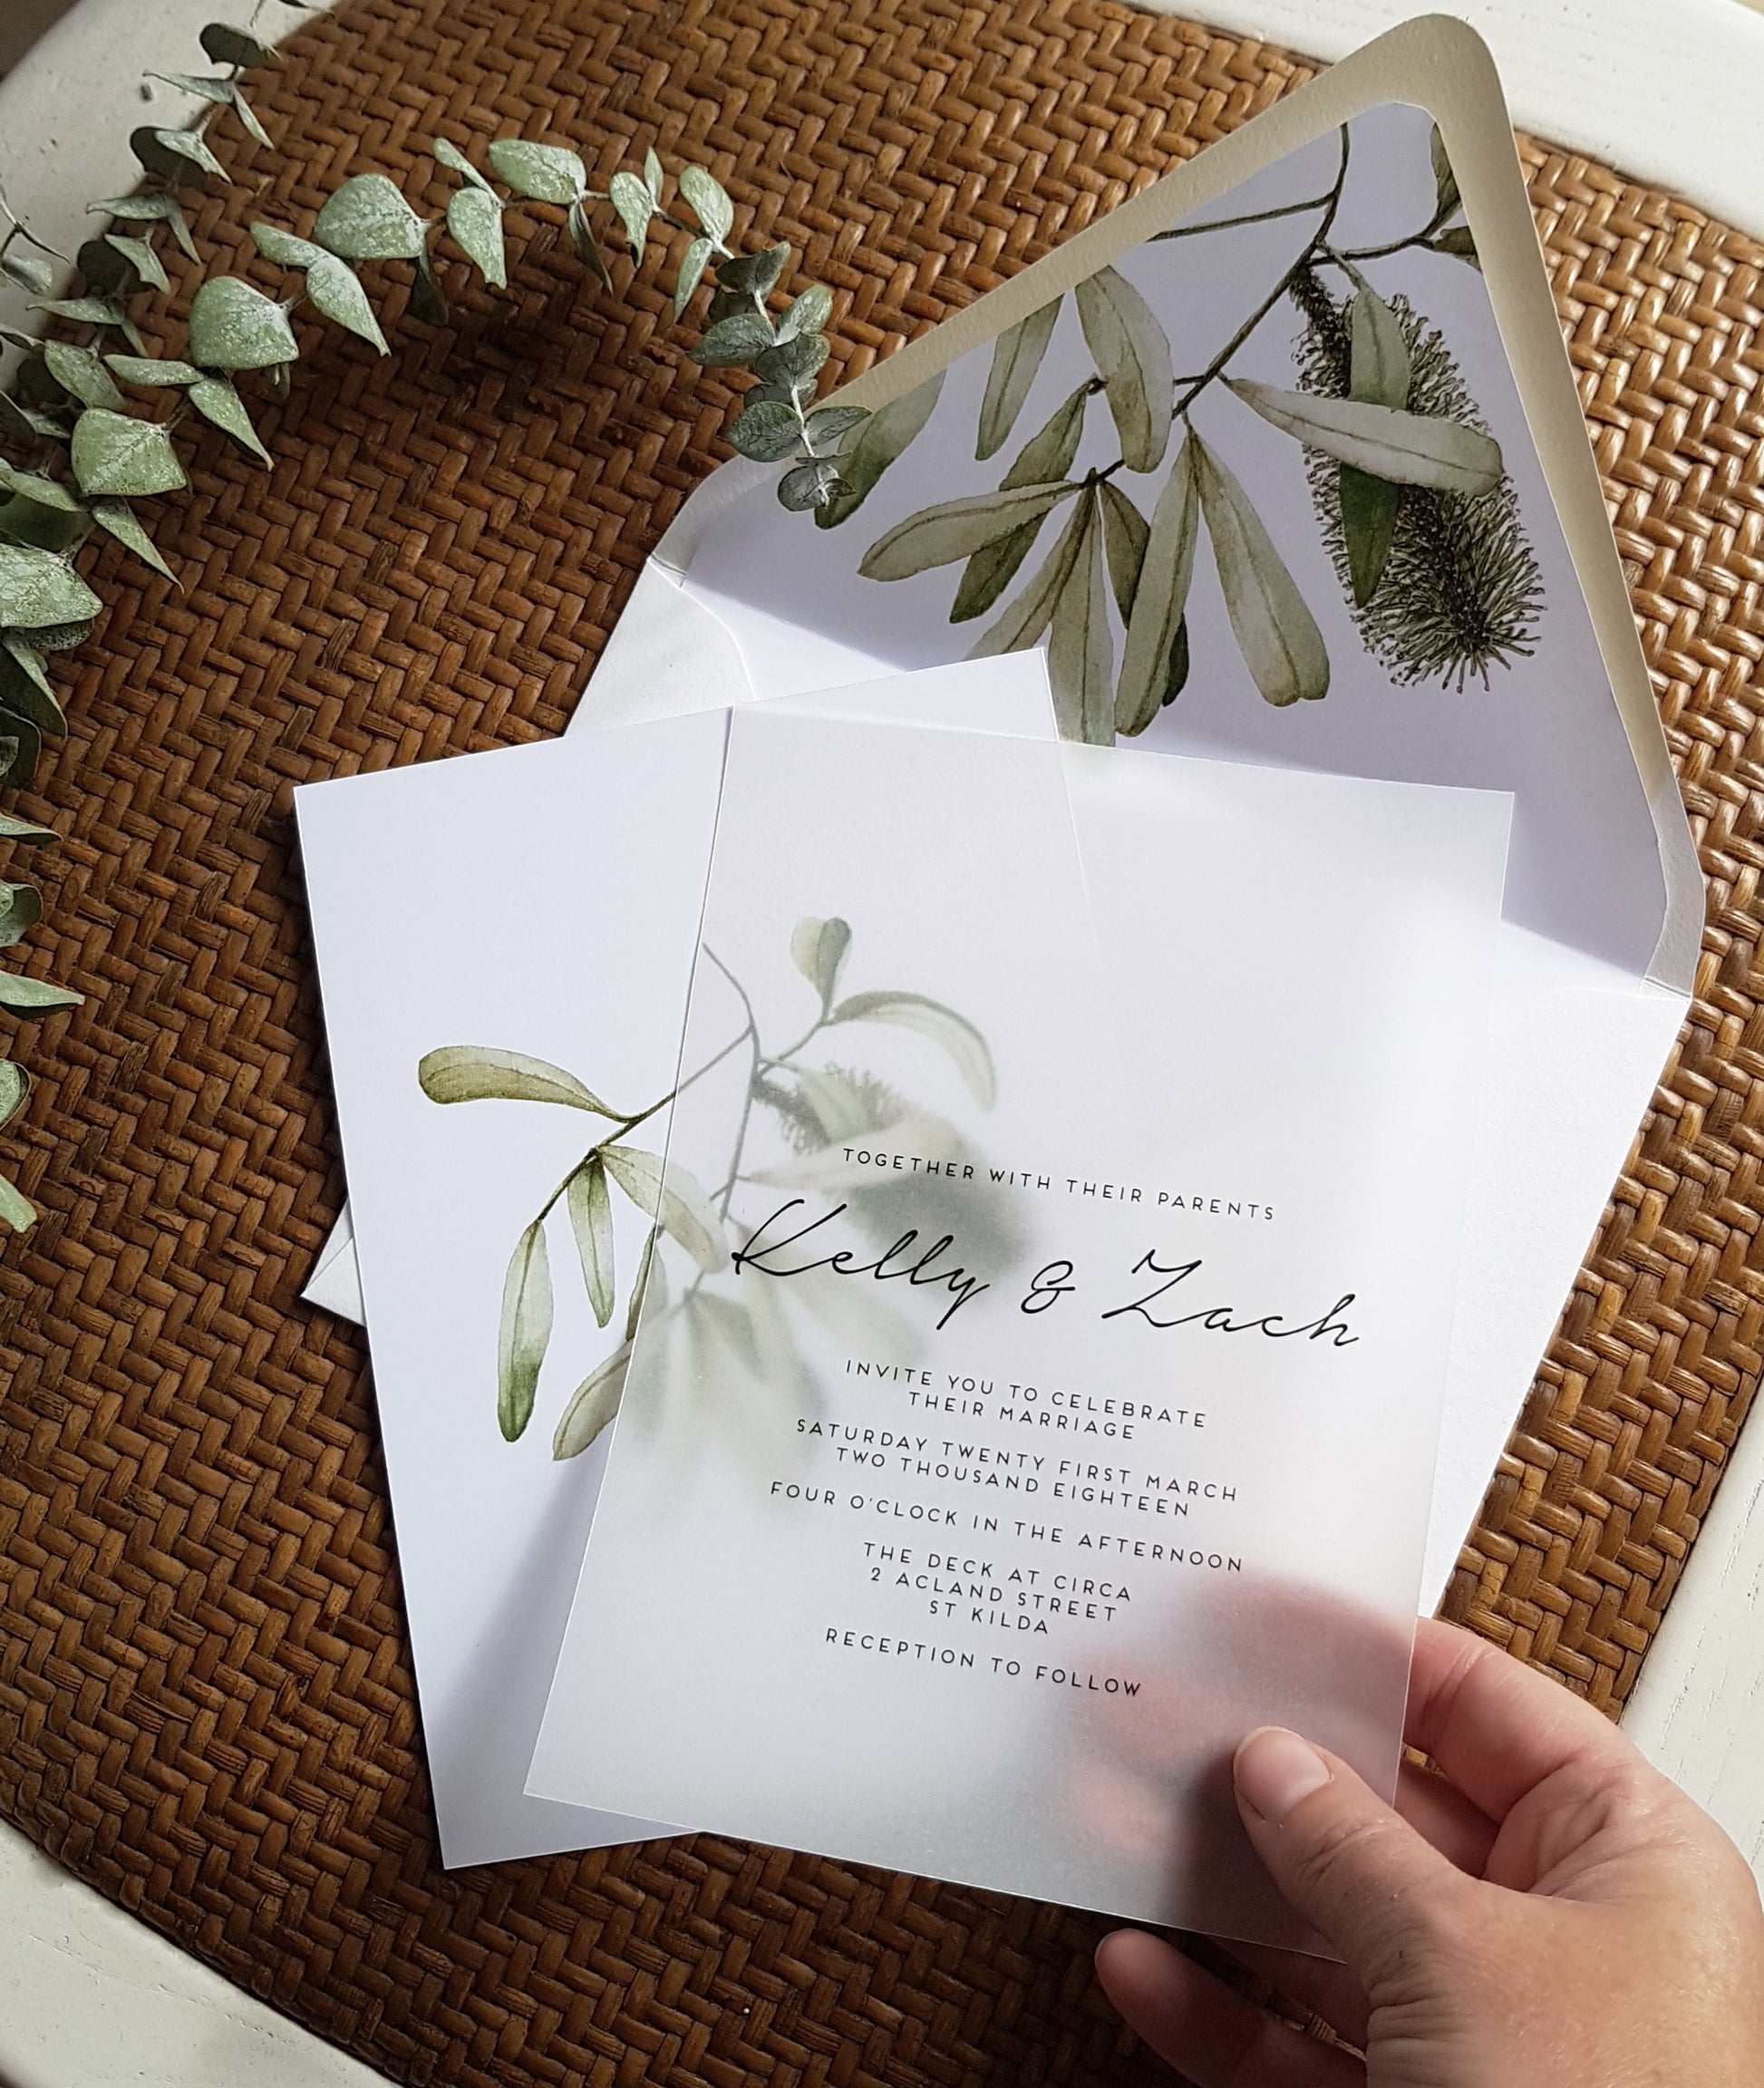 banksia wedding invite and envelope with liner, invite features text printed onto a vellum/transparent paper